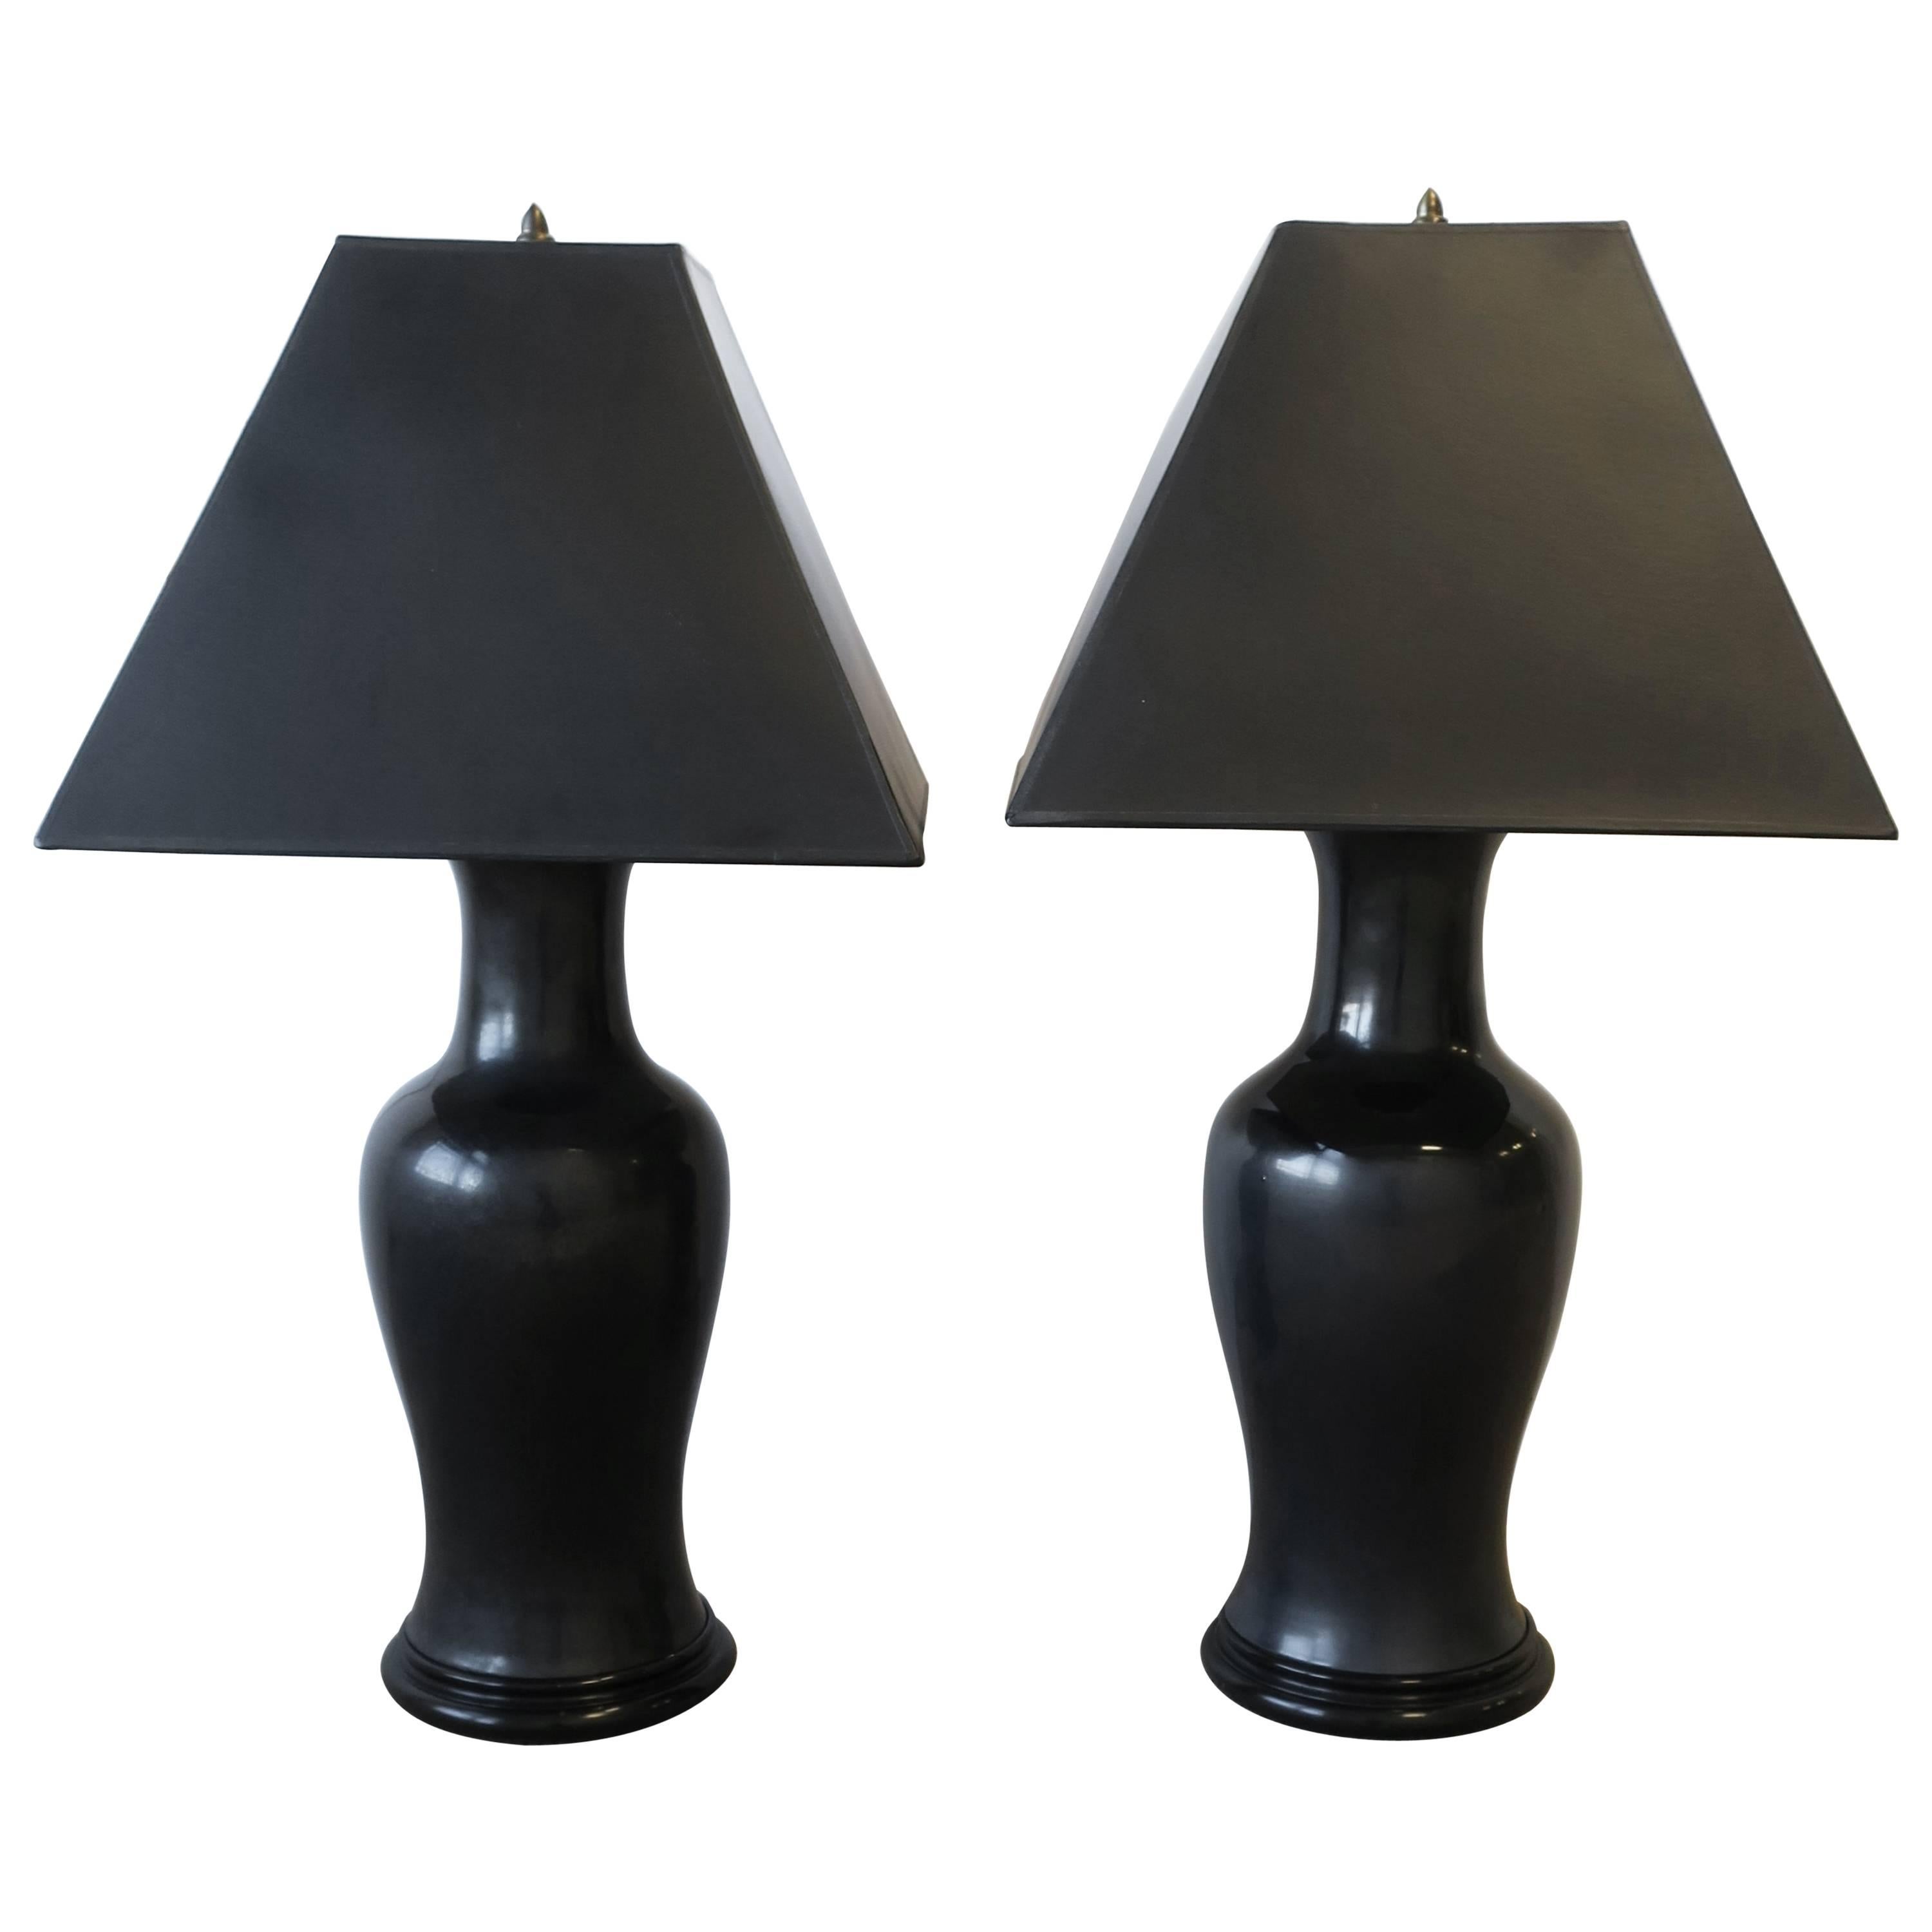 Black Ginger Jar Ceramic Pottery and Brass Table Lamps, Pair For Sale